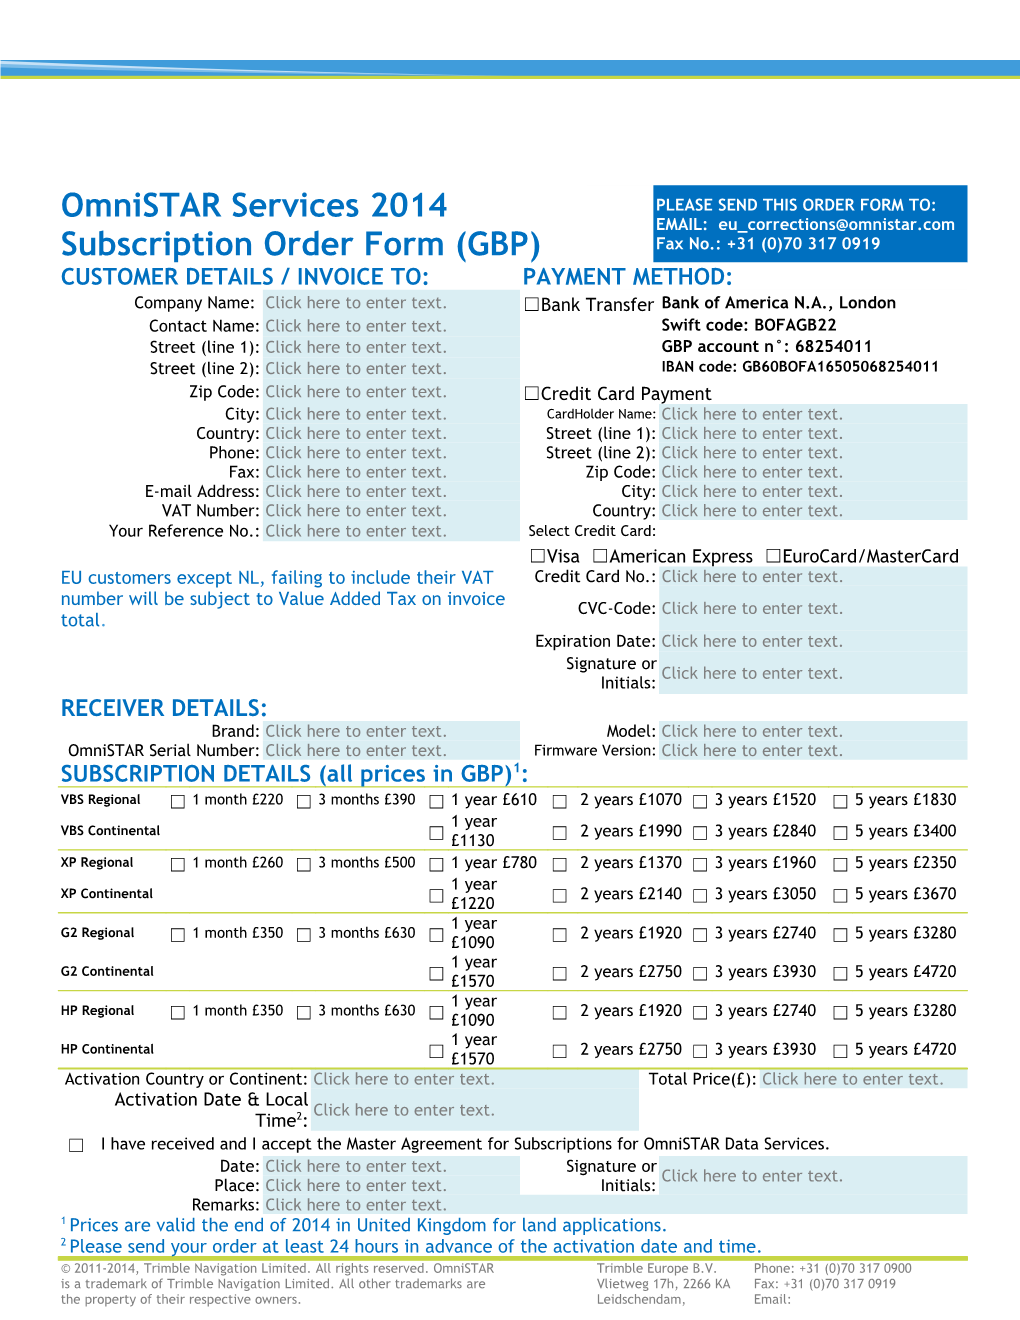 The Use of Omnistar Data Services Without a Current, Valid, Fully Paid Subscription Is